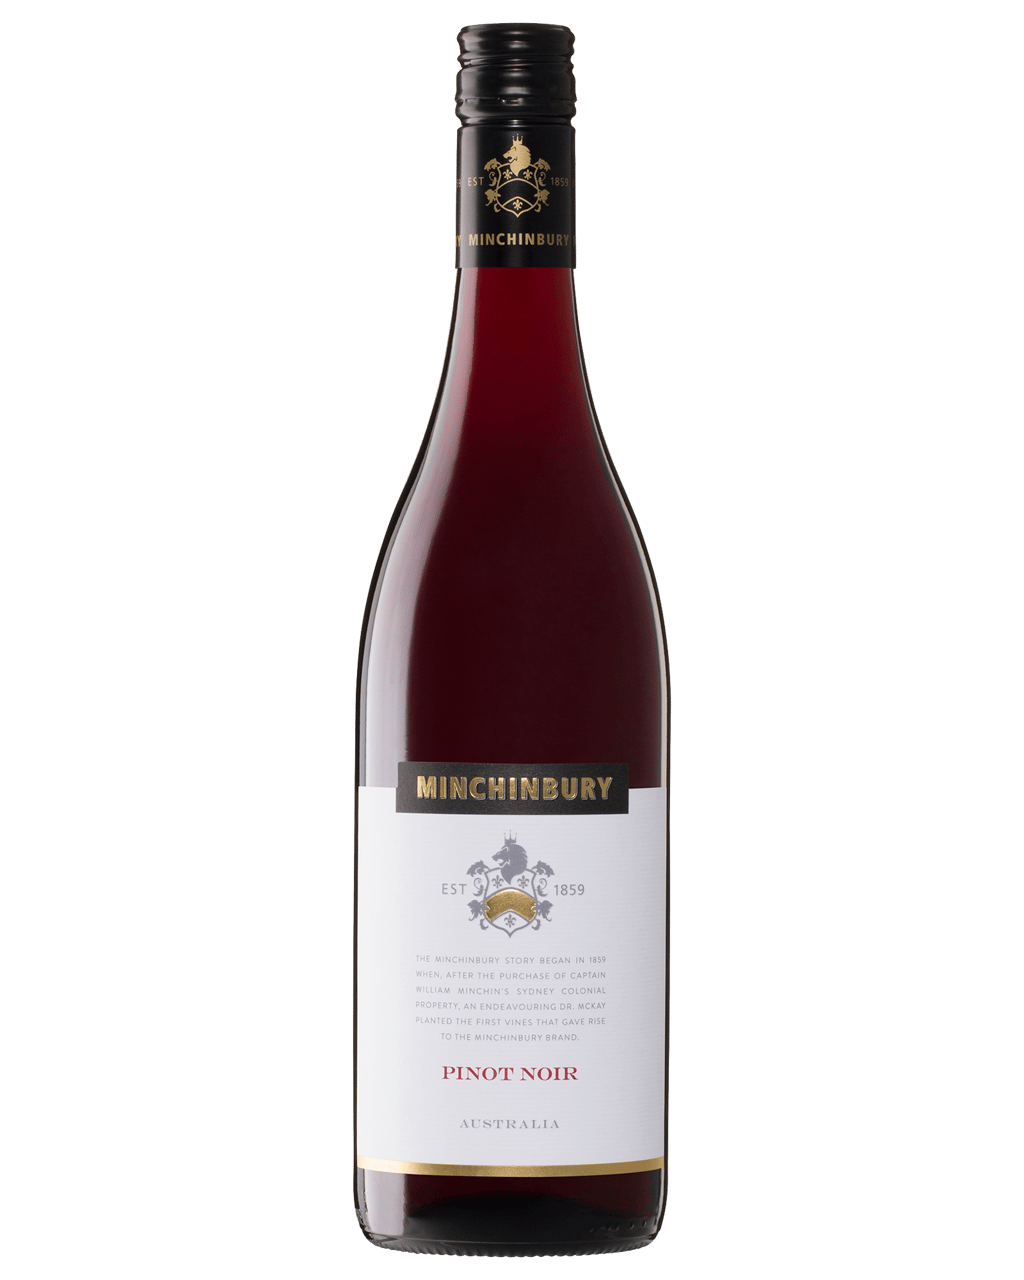 Pinot Noir – Finding a home in Australia